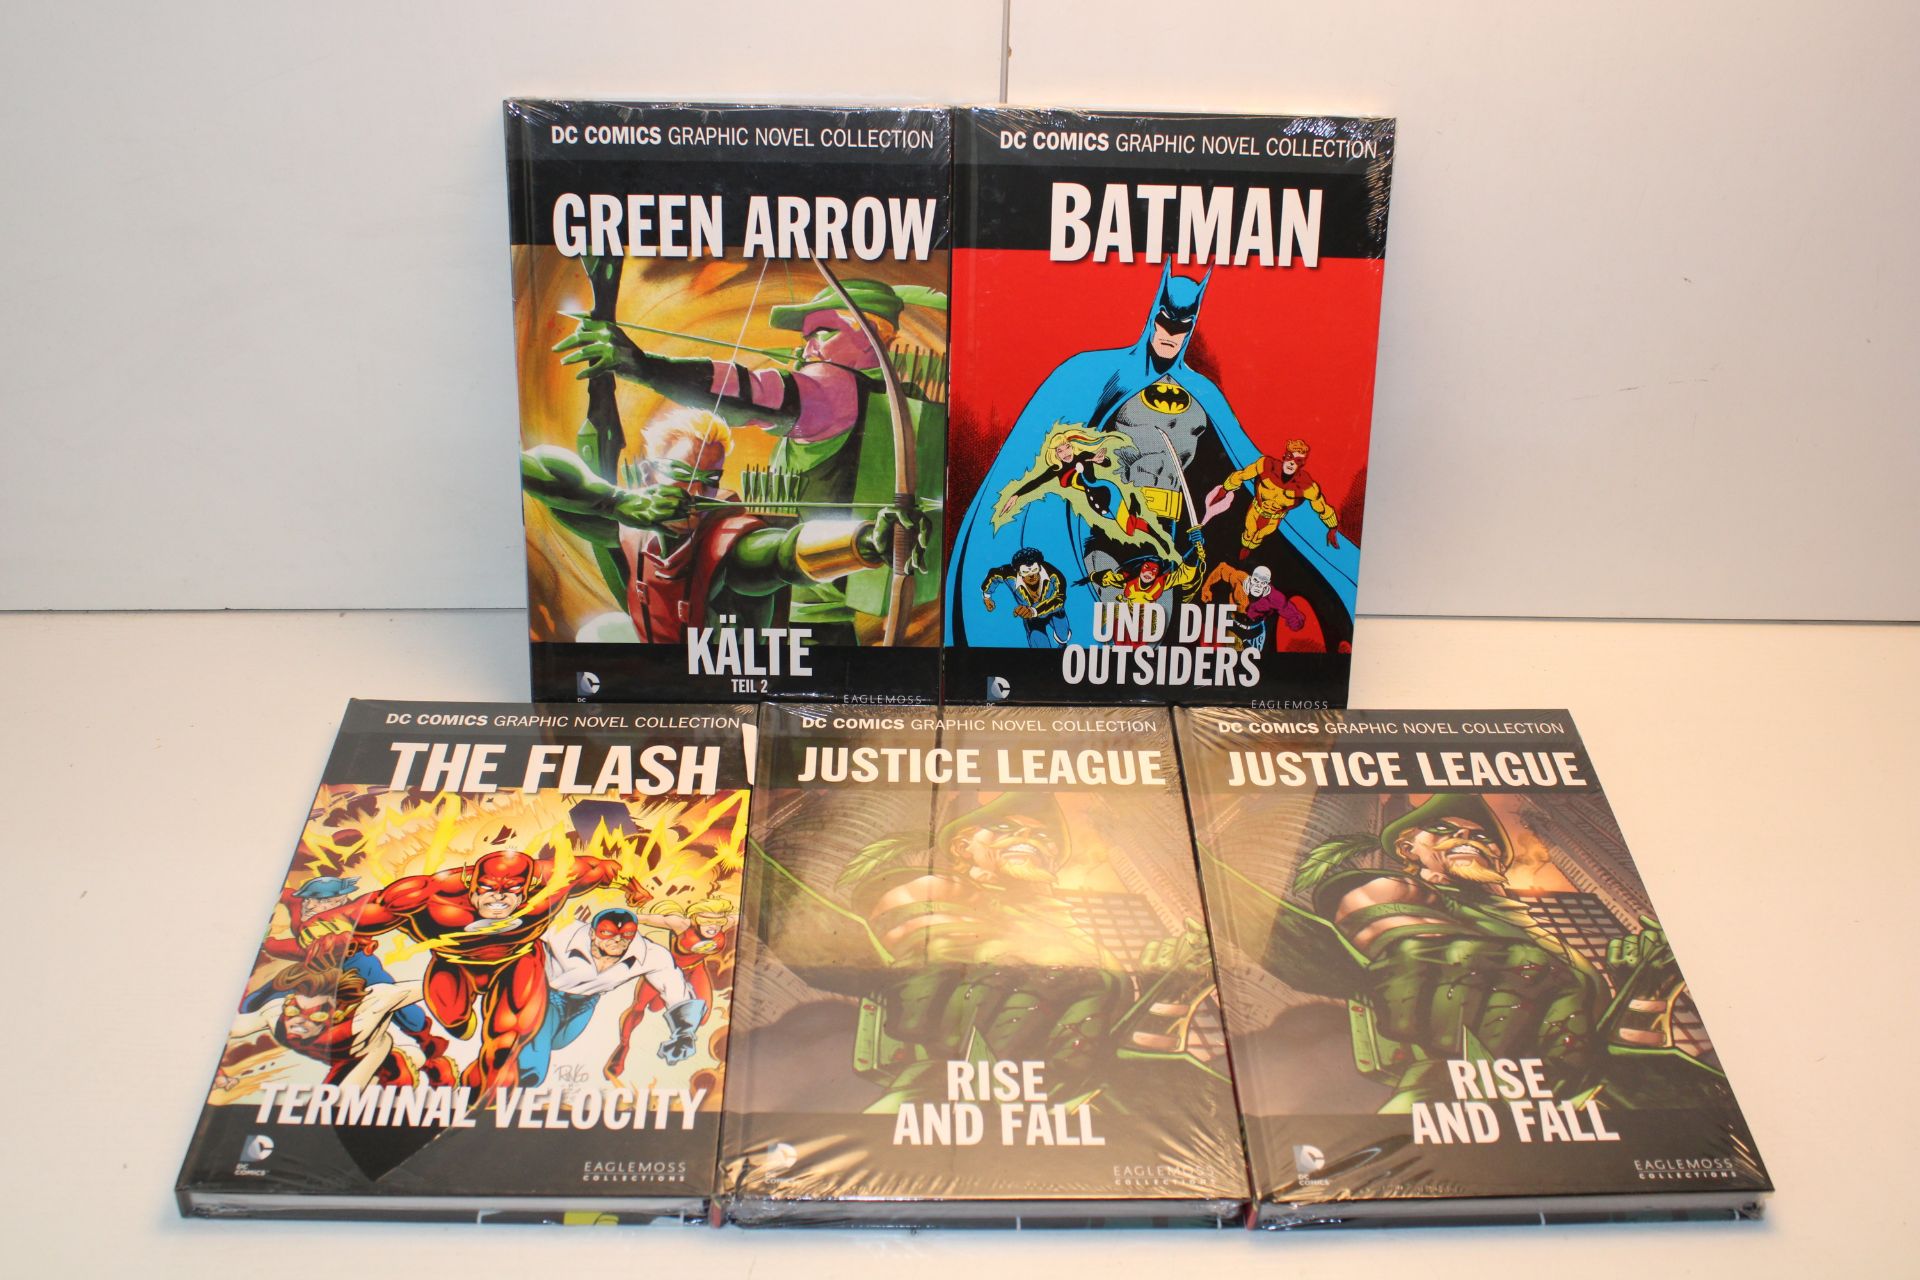 10X DC COMICS GRAPHIC NOVEL EDITION BOOKS (GERMAN) COMBINED RRP £200.00Condition ReportAppraisal